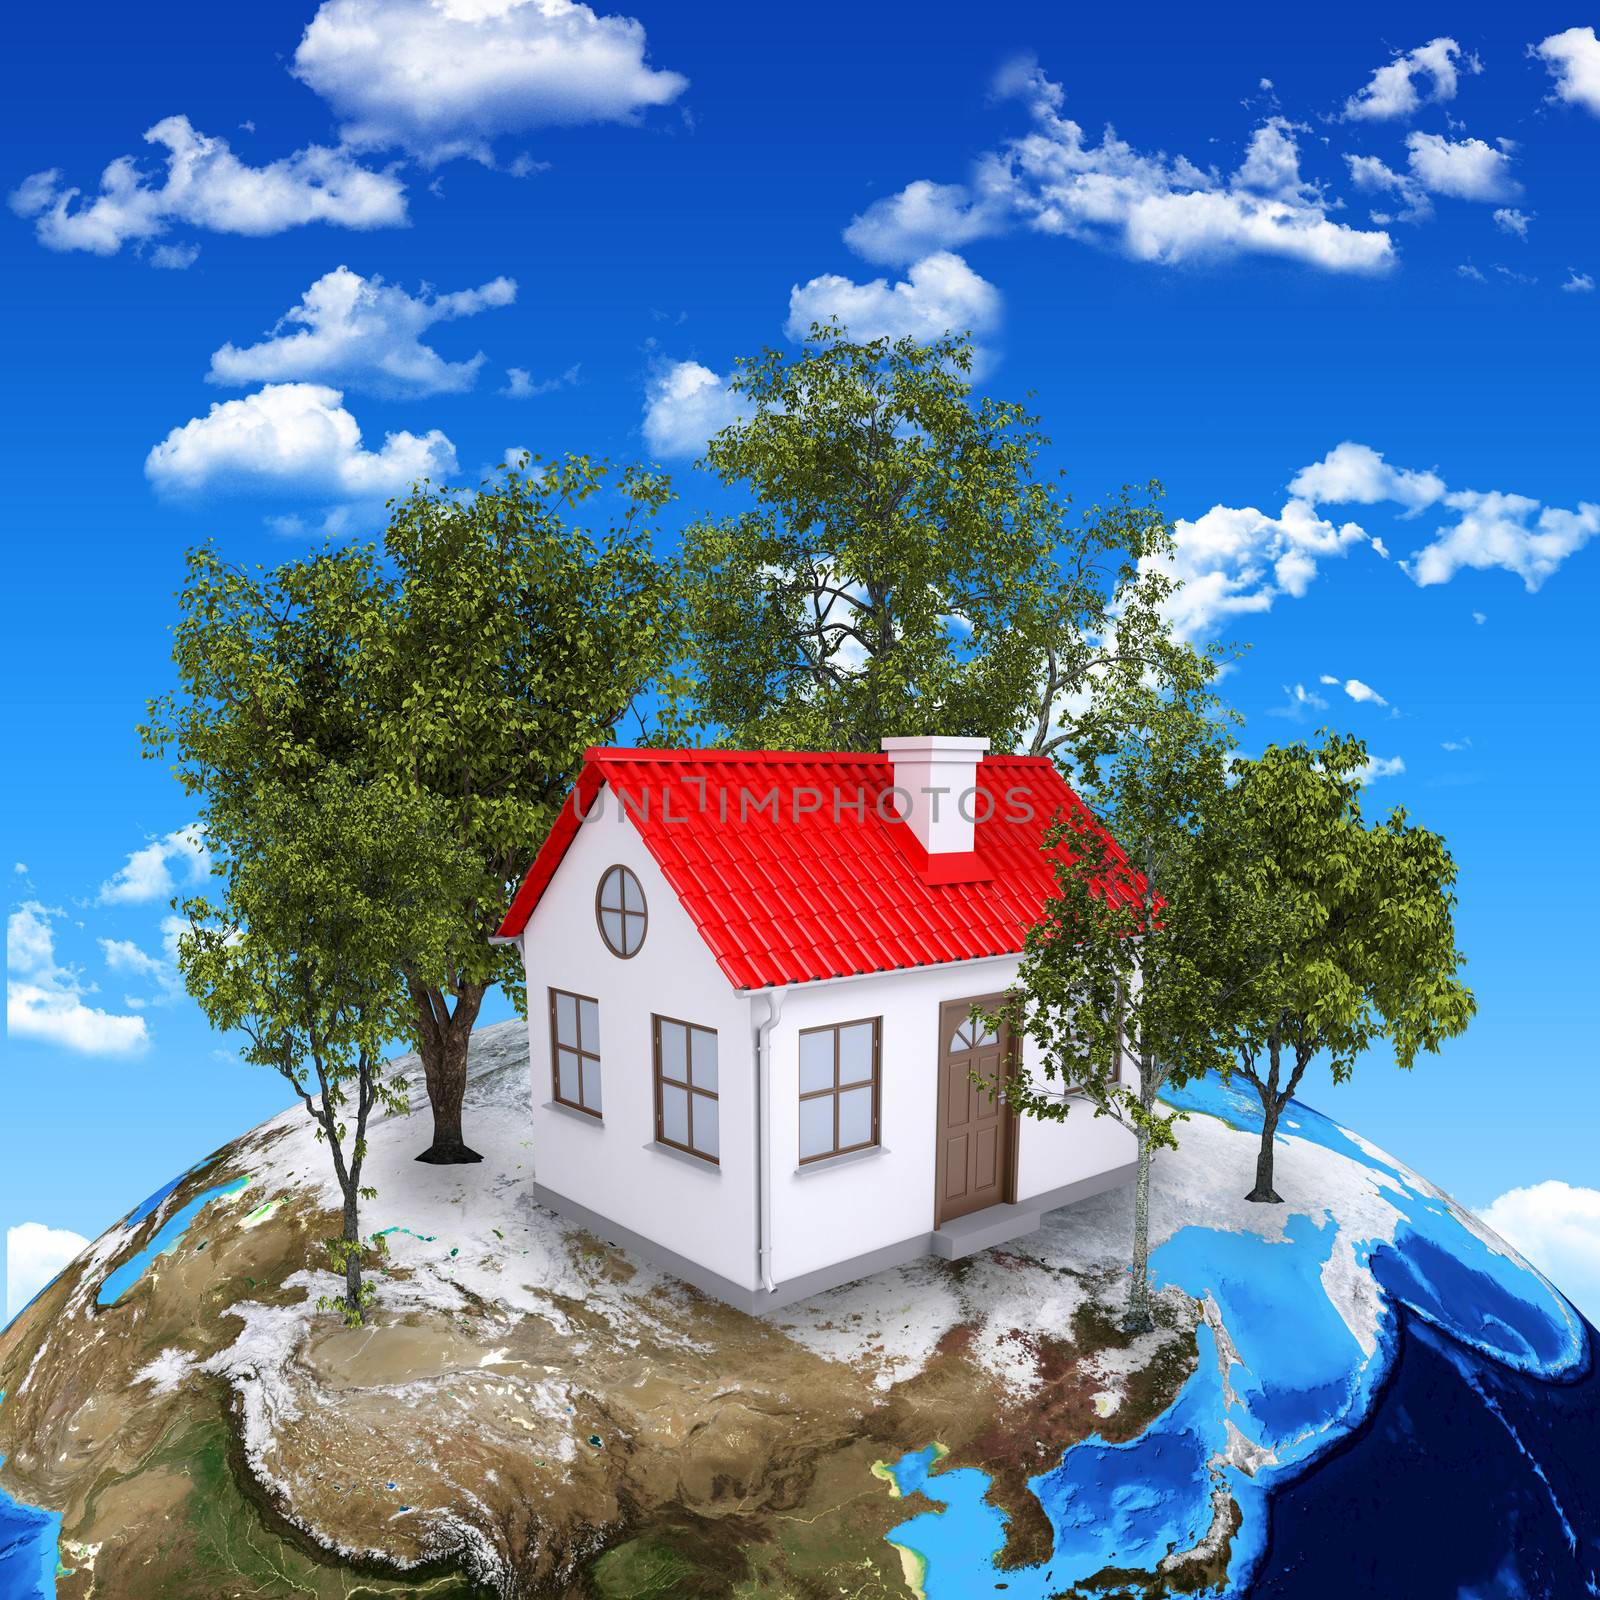 Earth planet image with house on surface. Elements of this image are furnished by NASA